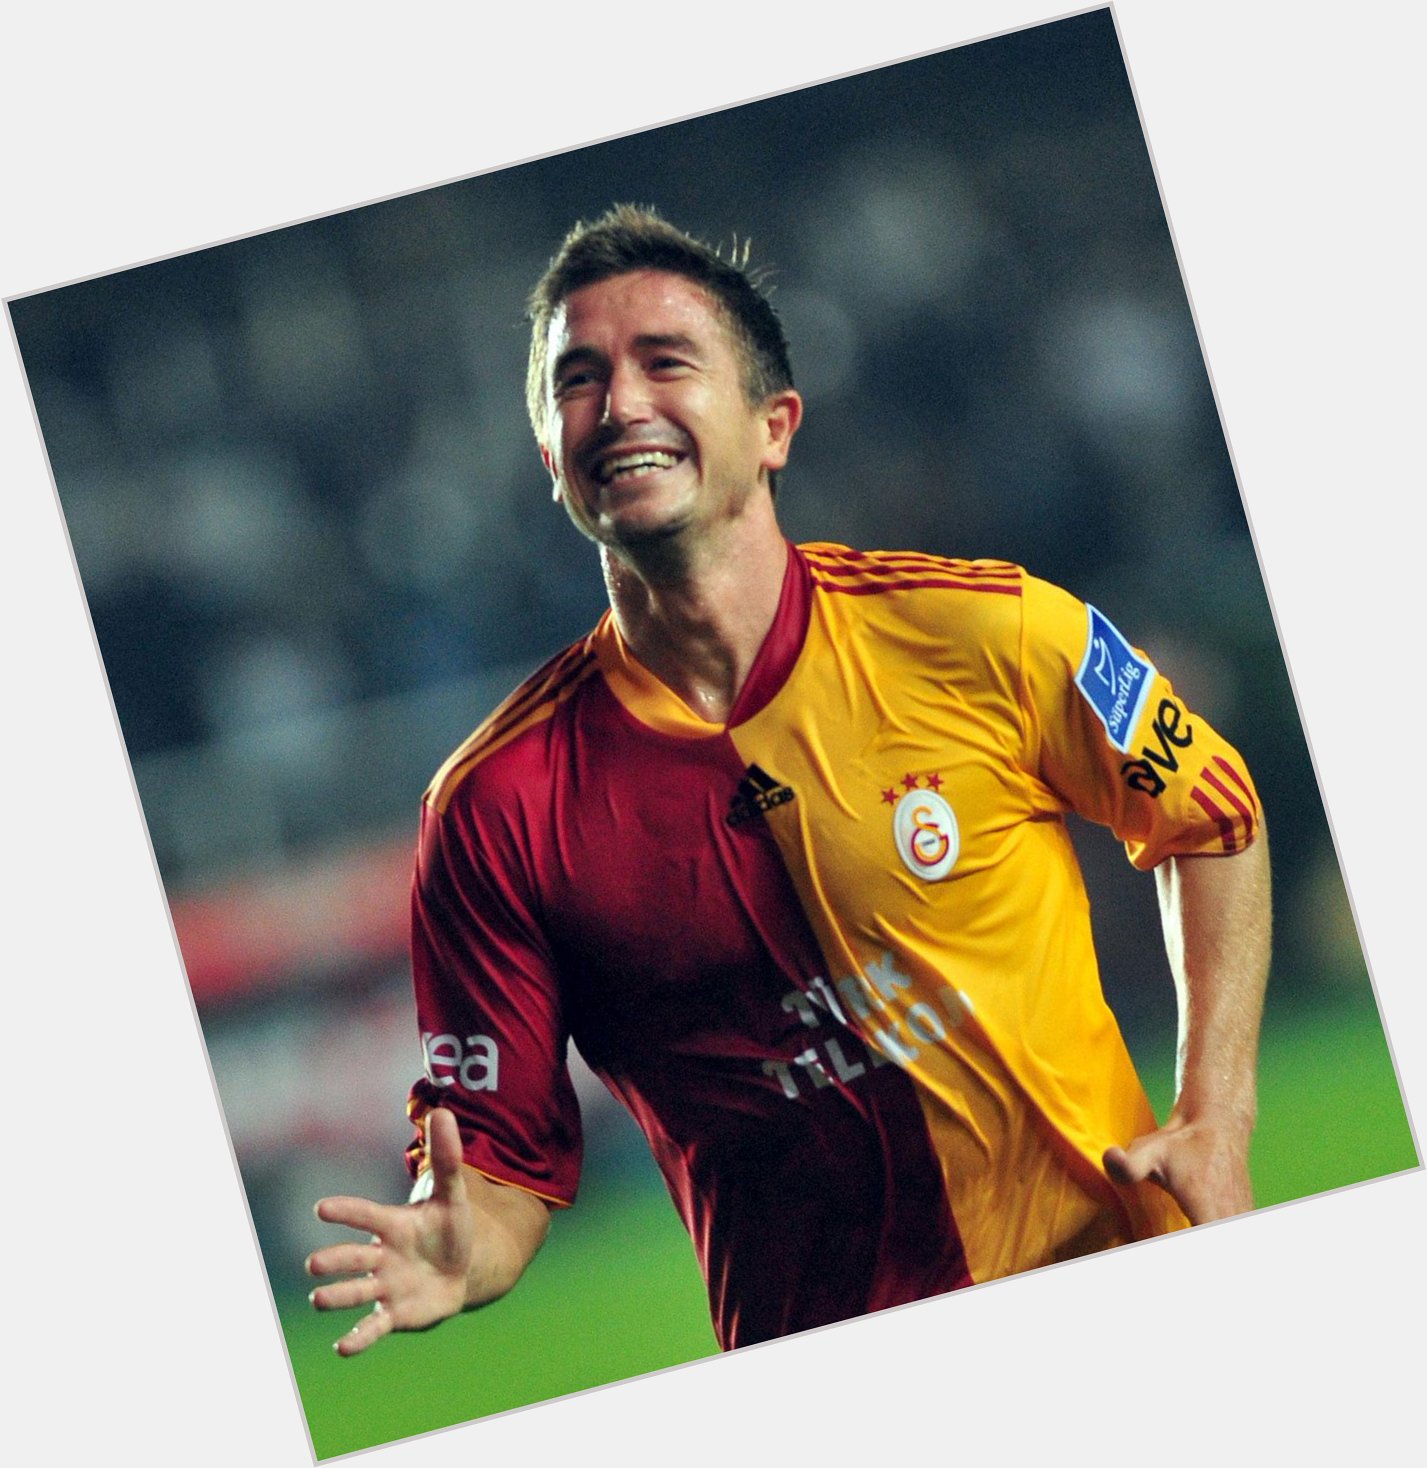 My Name Is Harry Kewell, Kewell From Galatasaray! Happy Birthday, The Wizard of Oz!  